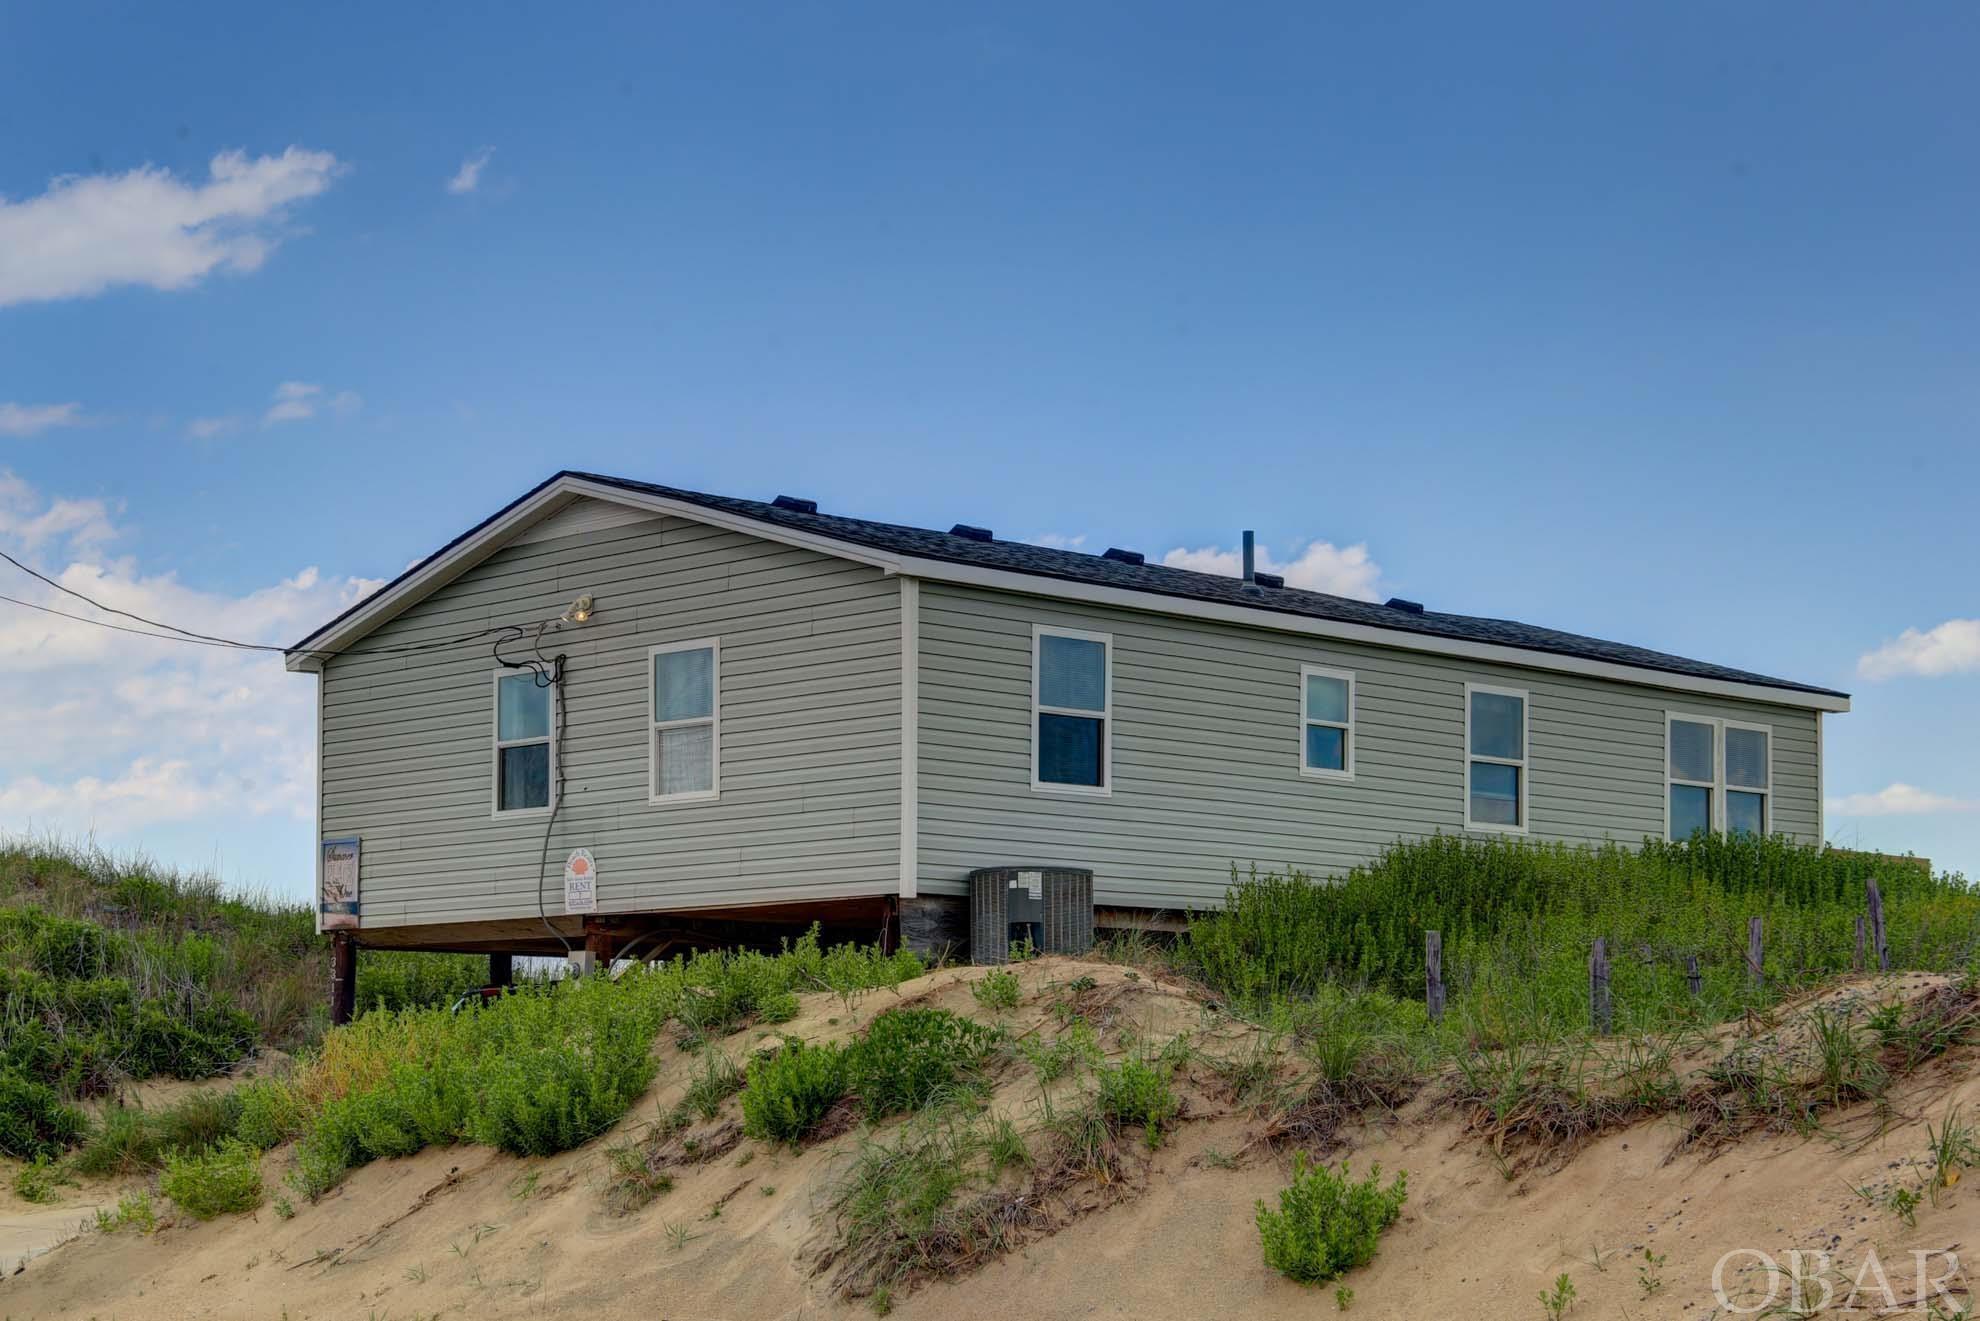 **Beautiful Kill Devil Hills Oceanfront** High ROI ** Low Expenses** New Decking **$78,200 for 2021 GRI** Roof 2019***  If you are in the market for strictly an investment property, this home has a great ROI with low expenses (equalling a great NET Income/Bottom line). This home has the potential to have bookings throughout the year and produce even higher numbers with a open calendar (and less owner weeks reserved).  If you are searching for the rare Kill Devil Hills Oceanfront to enjoy with your family, this home will delight. Talk about dining with a view; this home enjoys tons of natural light and simply spectacular views that are unforgettable.   Simple yet Spacious, this home is a must see. The Coastal Chic decor has guests coming back year after year for another week full of memories. With four (4) bedrooms, this home feels cozy yet has plenty of room to spread out. The two ocean facing sliders, the main attraction is always on full display to enjoy. No matter the season, the new decks provide the perfect place to relax with cocktails or coffee or enjoying the freshest bounty from the sea!  This is a rare find on the beach! This gem is a "must see."